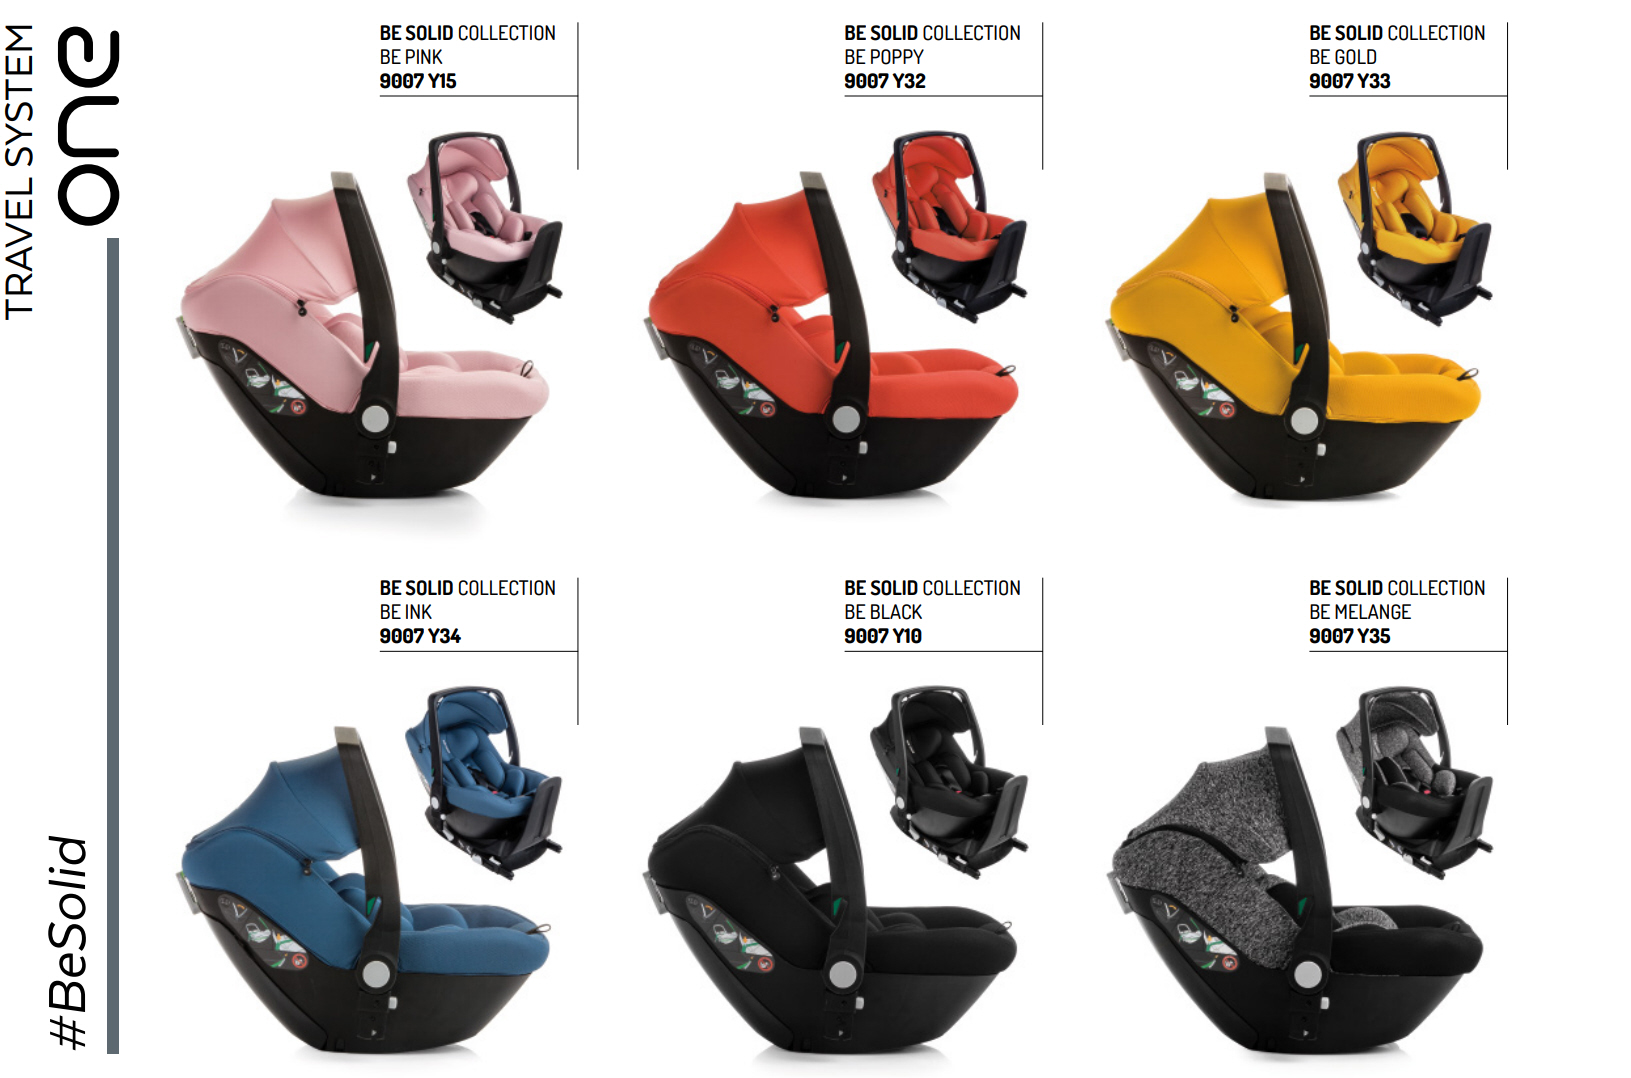 PORTABEBES ONE BE COOL TRAVEL SYSTEM COLORES